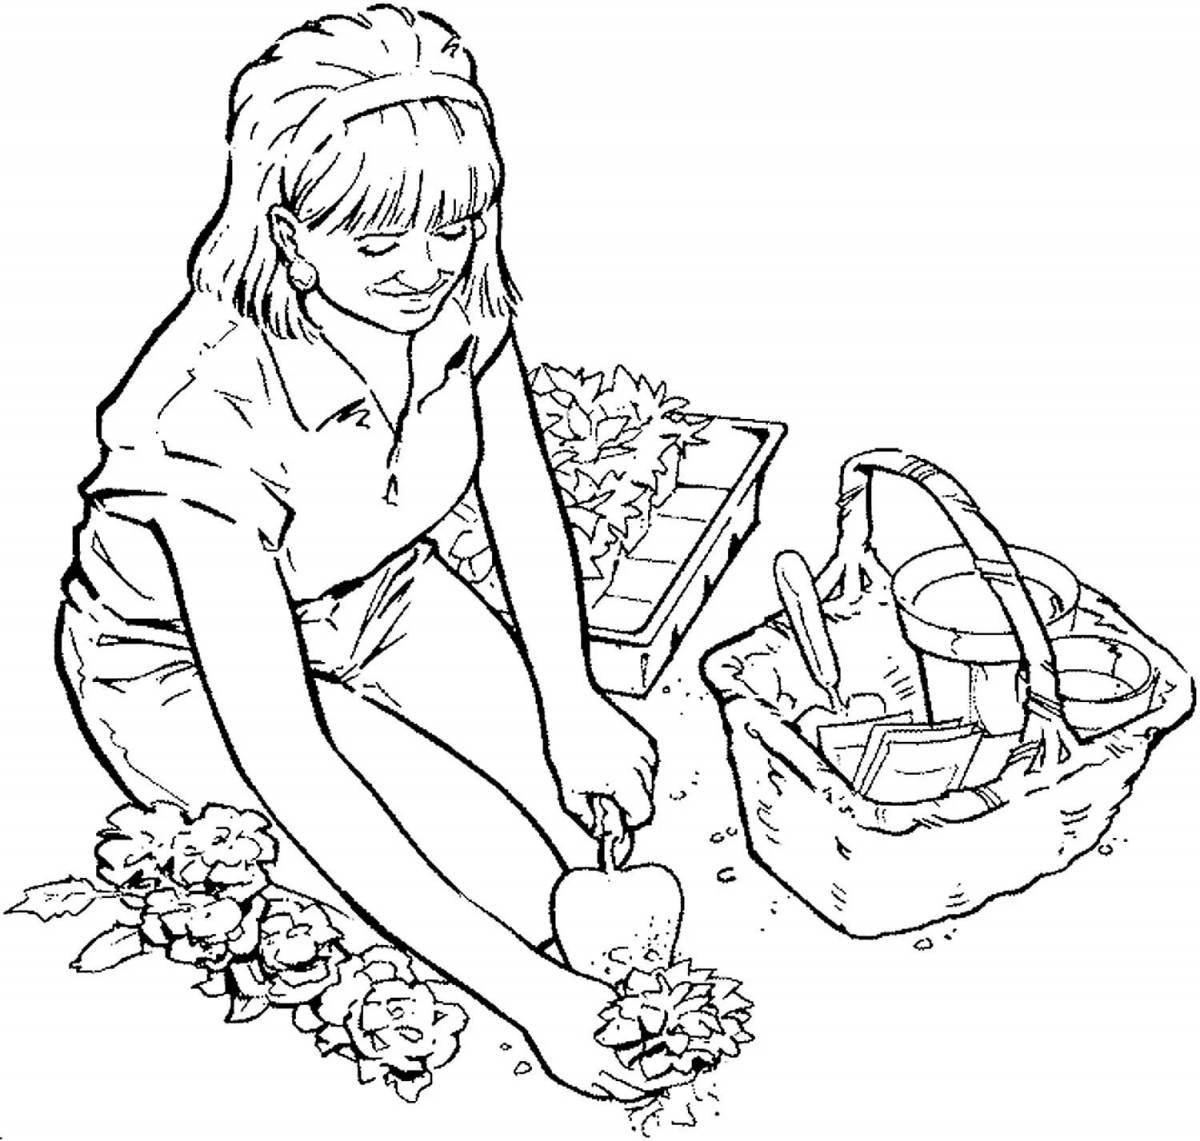 Animated gardener coloring page